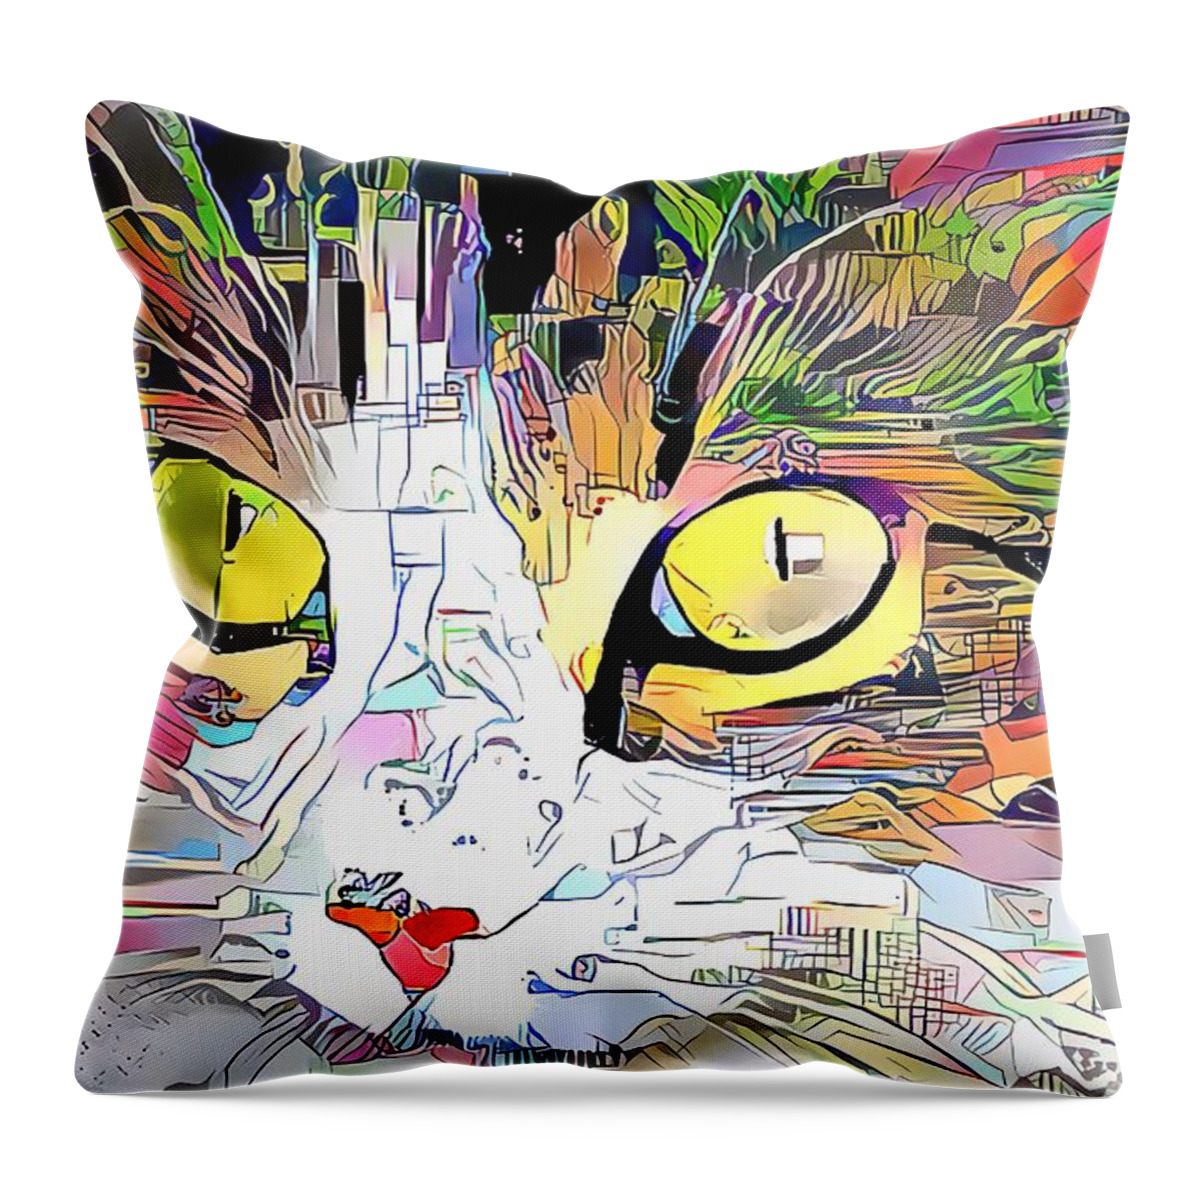 Golden Eyes Throw Pillow featuring the digital art What Big Golden Eyes You Have by Don Northup